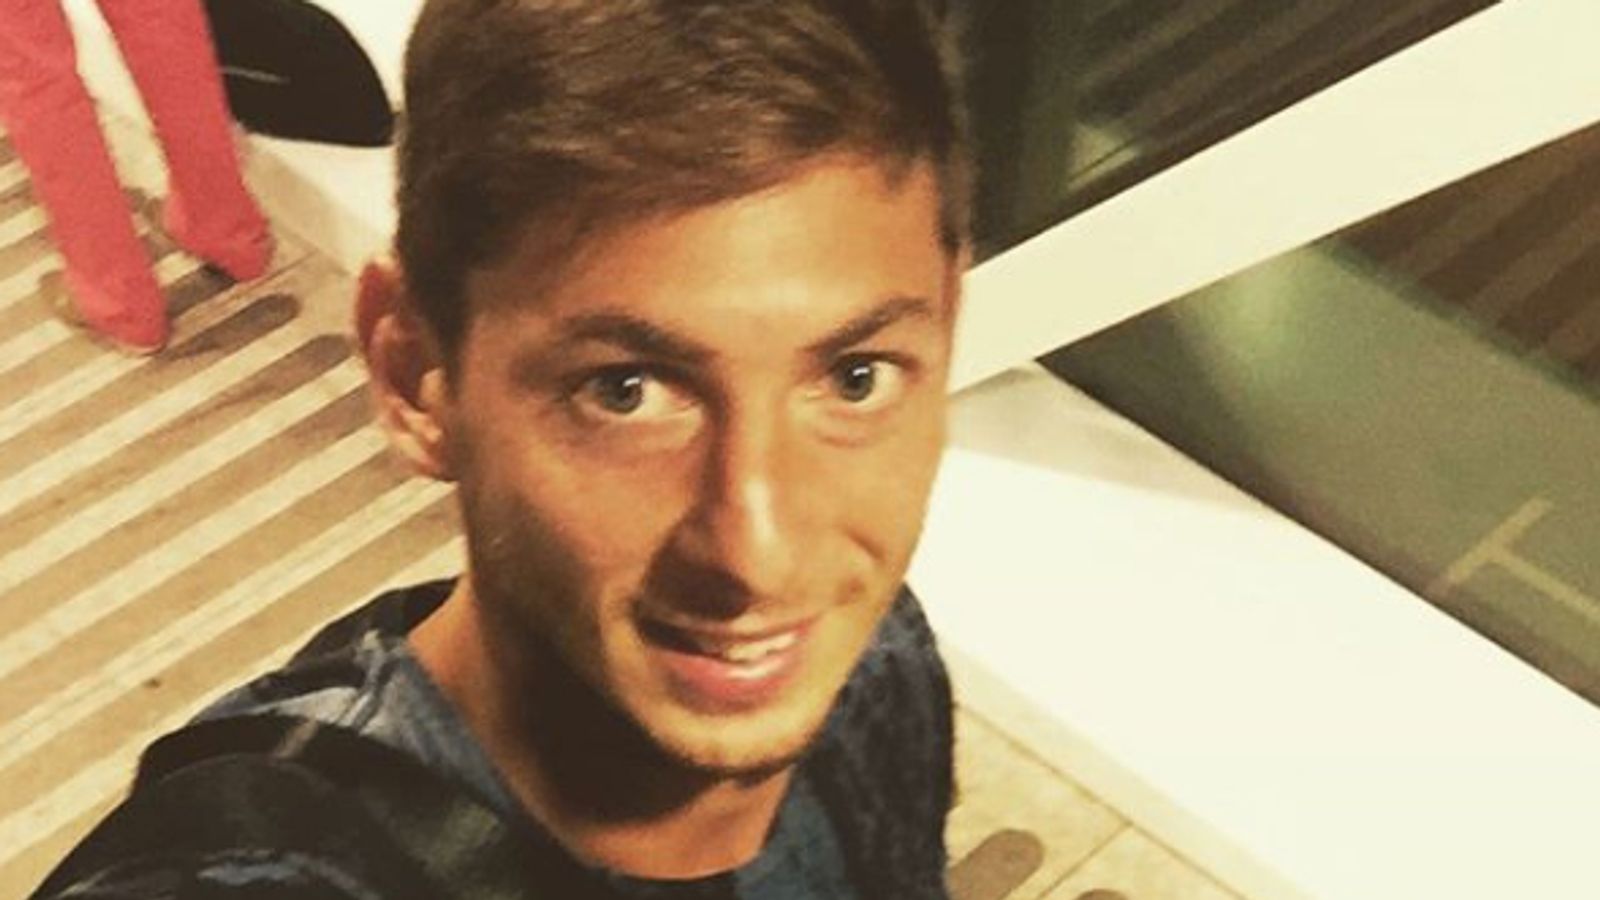 Emiliano Sala's father describes anguish after missing Premier League footballer's plane found